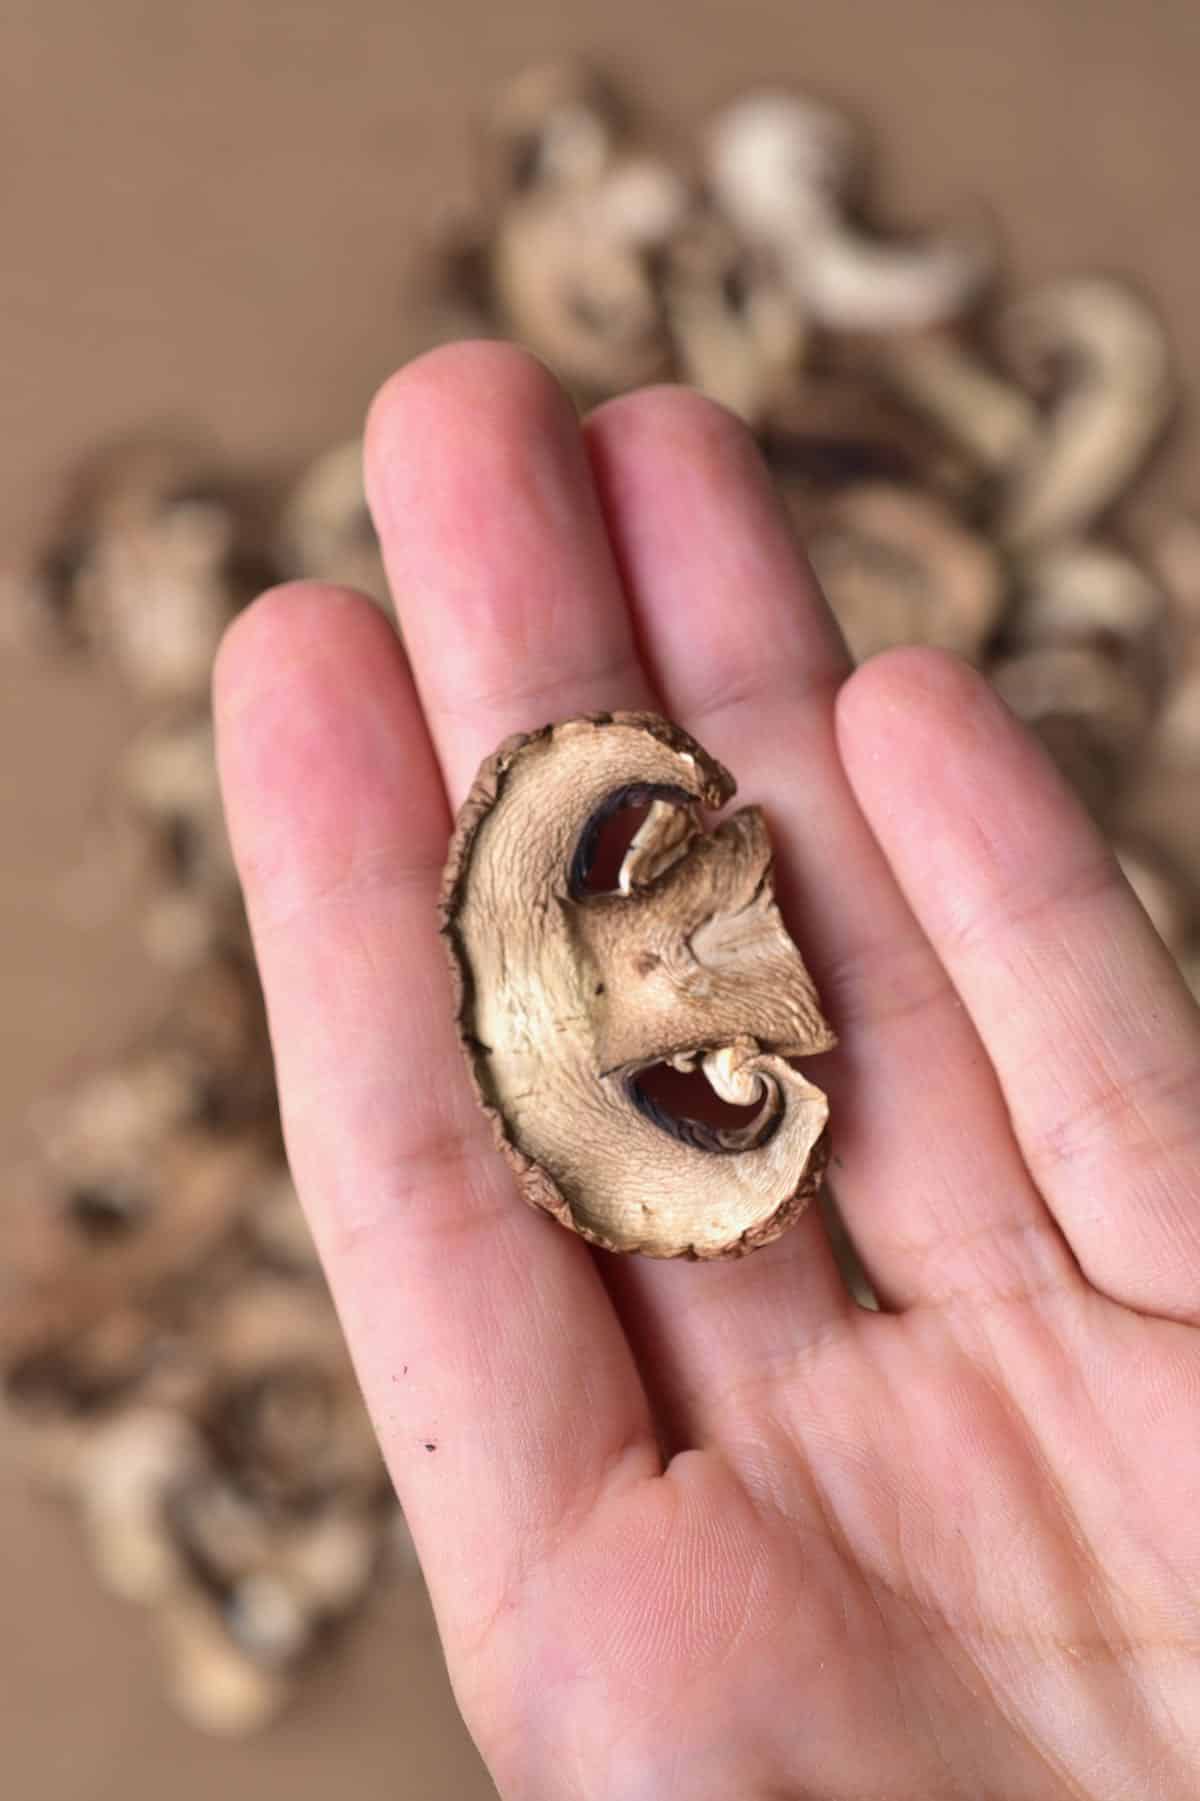 A hand holding a slice of homemade dried mushrooms